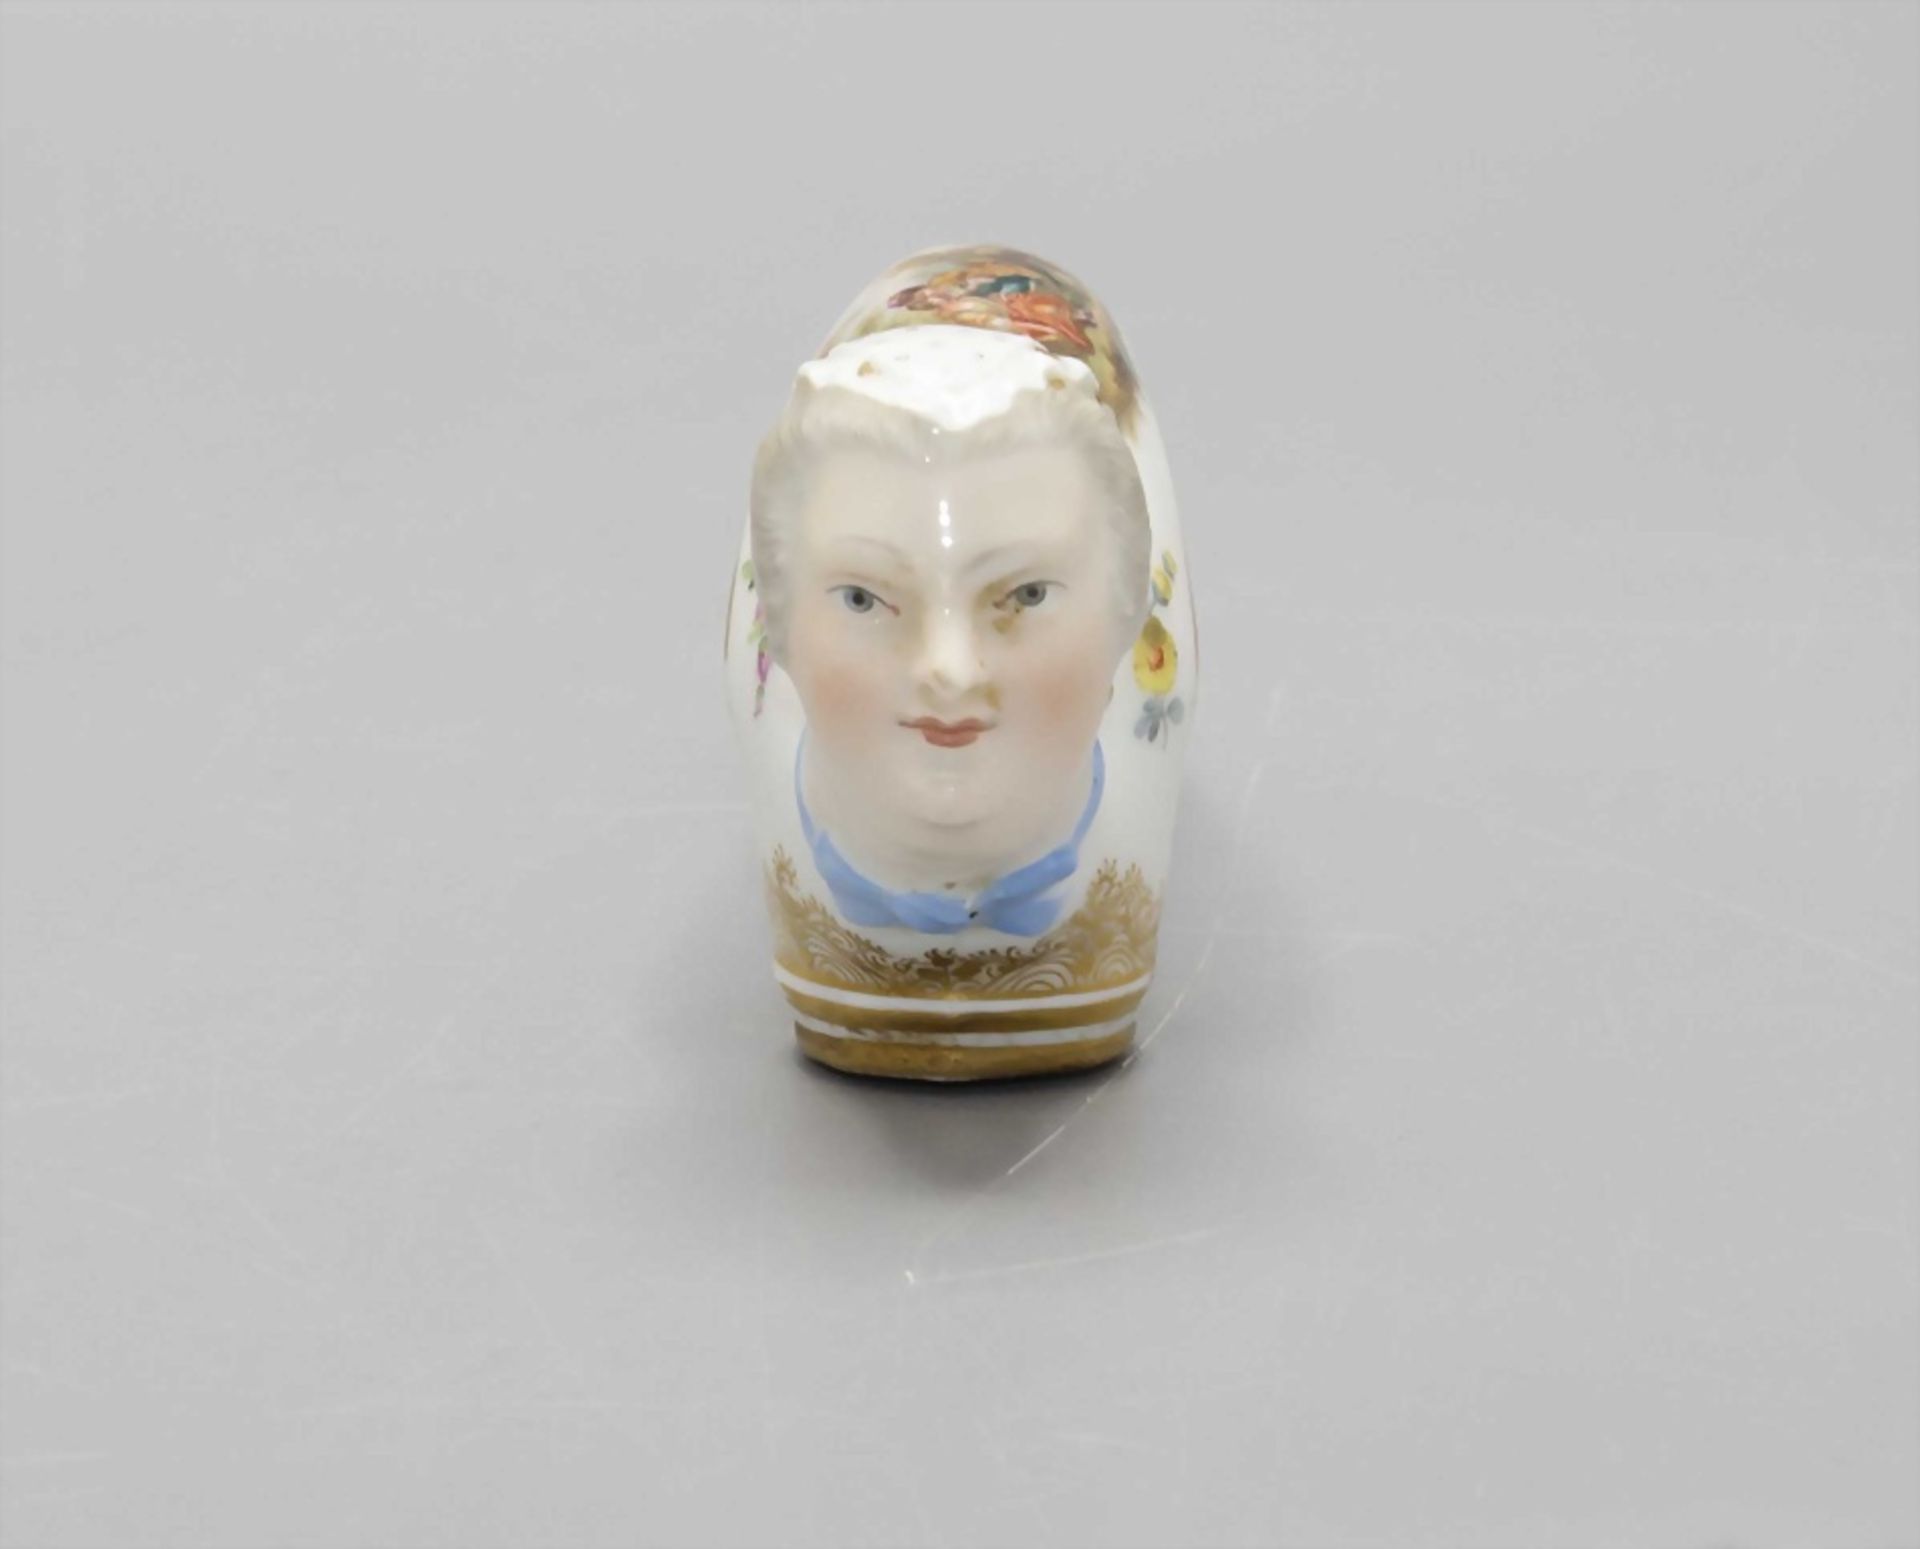 Stockgriff mit Frauenkopf und Watteau-Szene / A cane handle with the head of a woman and a ... - Image 3 of 6